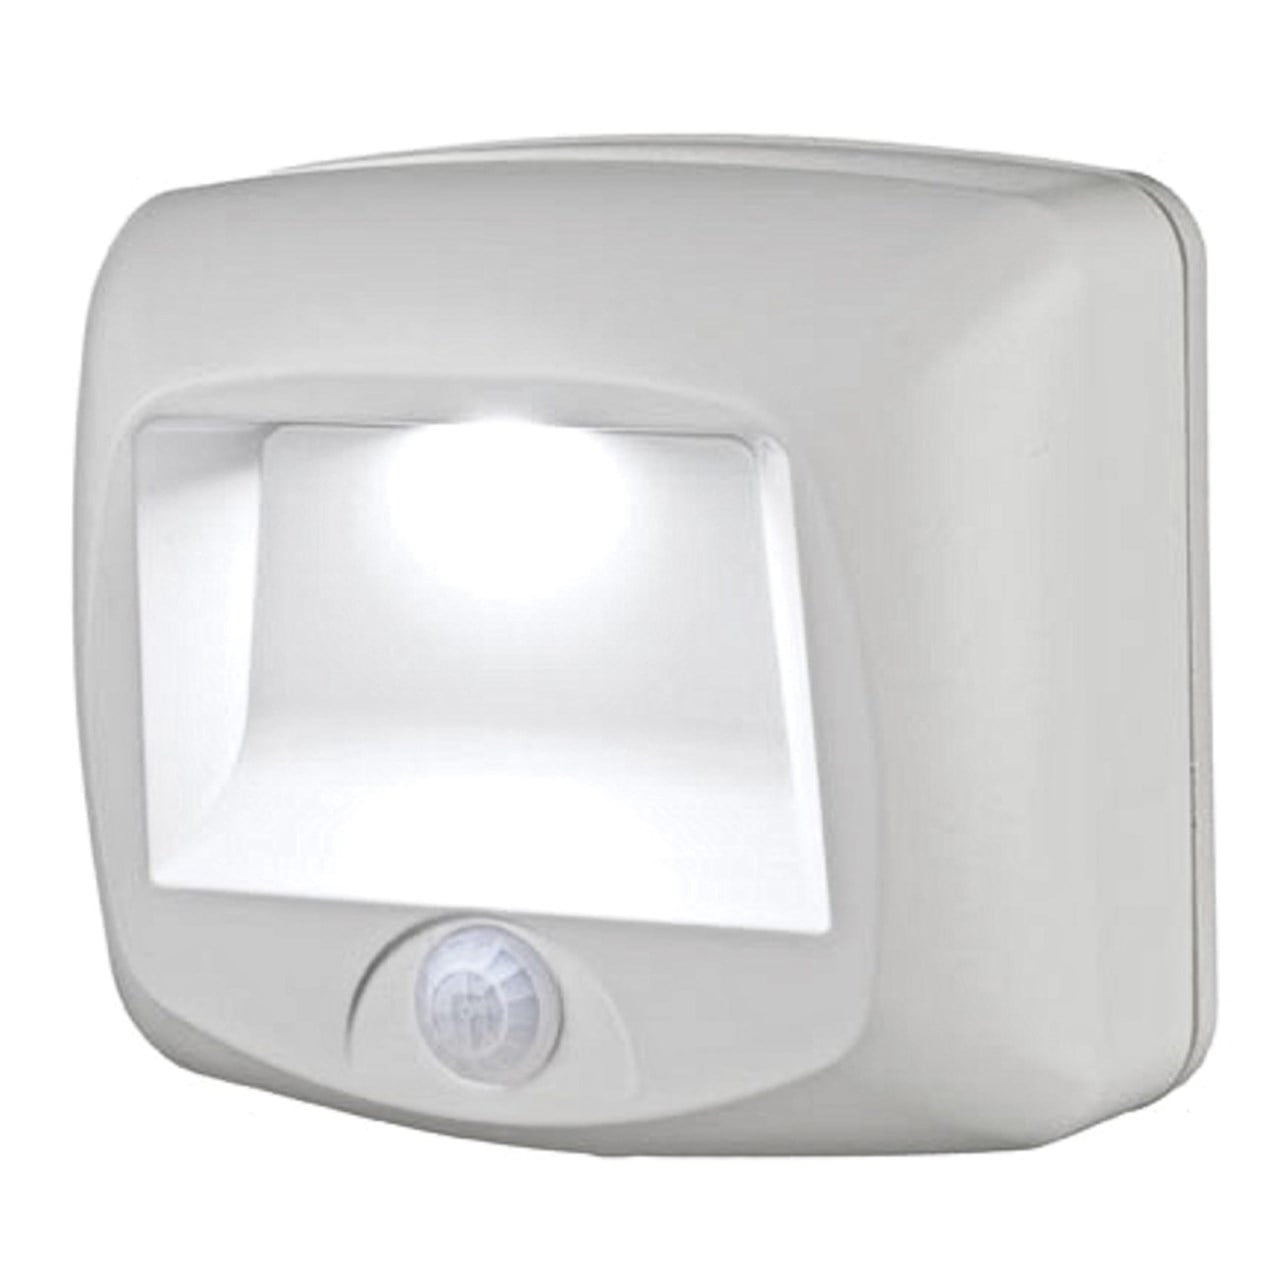 Mr White Beams MB530 Wireless Battery-Operated Indoor/Outdoor Motion-Sensing LED Step Light 